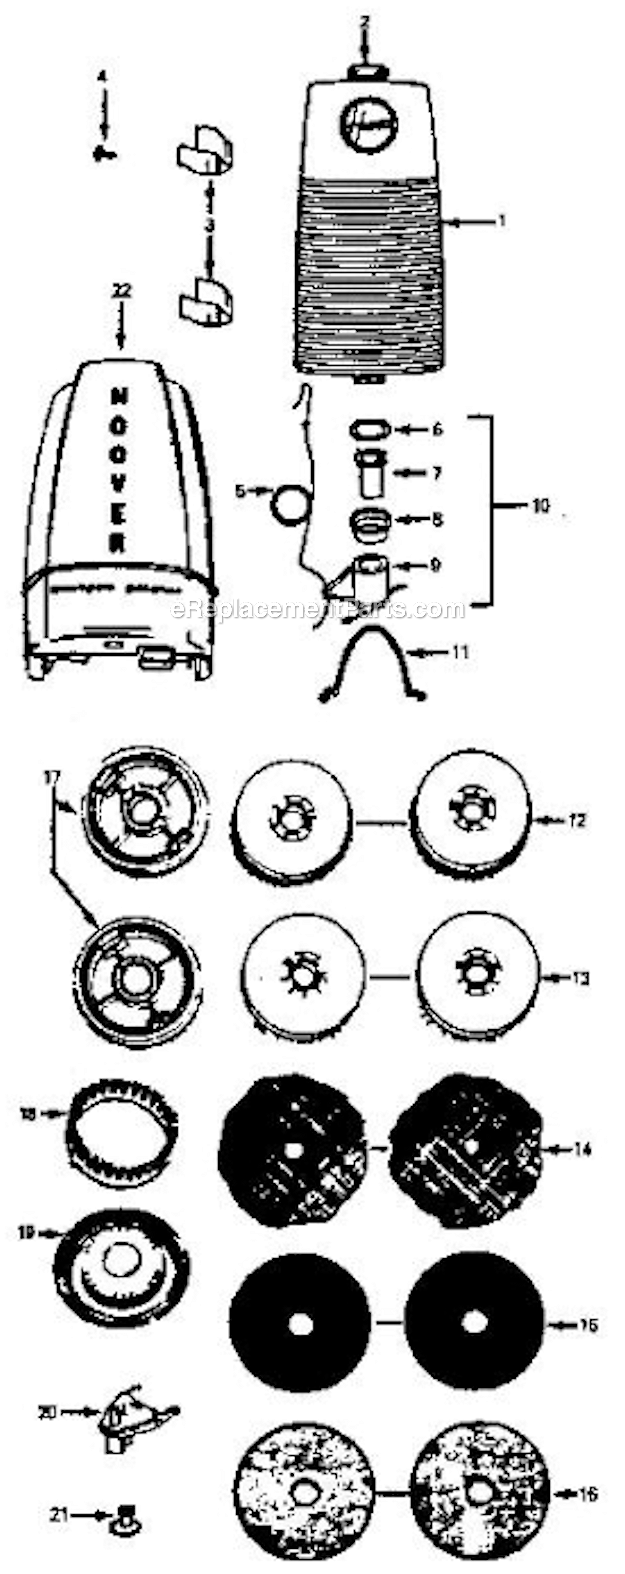 Hoover 5240 Scrubber Polisher_Accessories Diagram